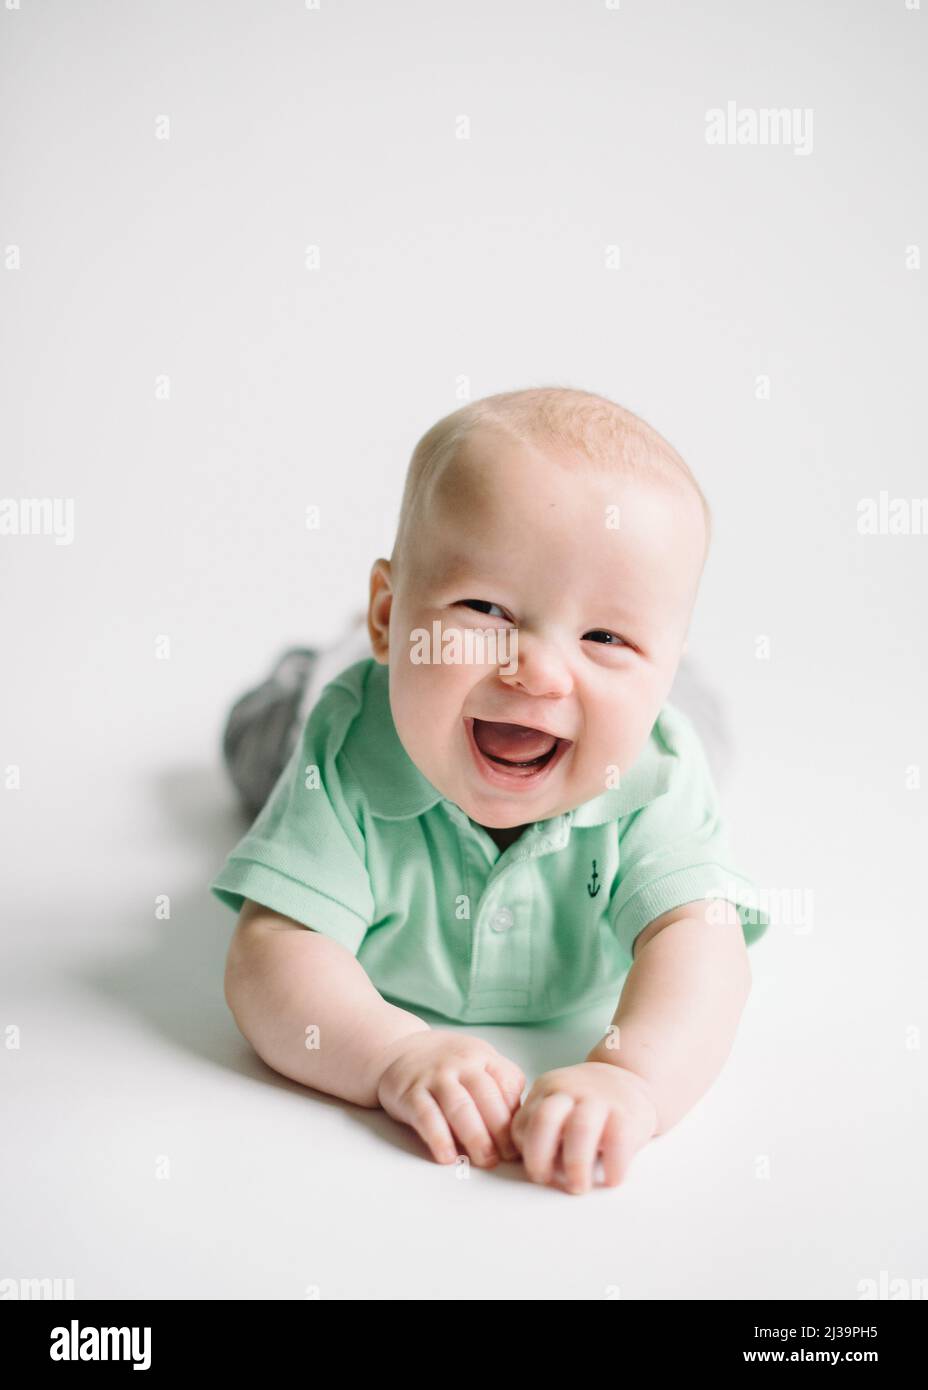 Happy Caucasian baby boy on white background wearing a green shirt Stock Photo